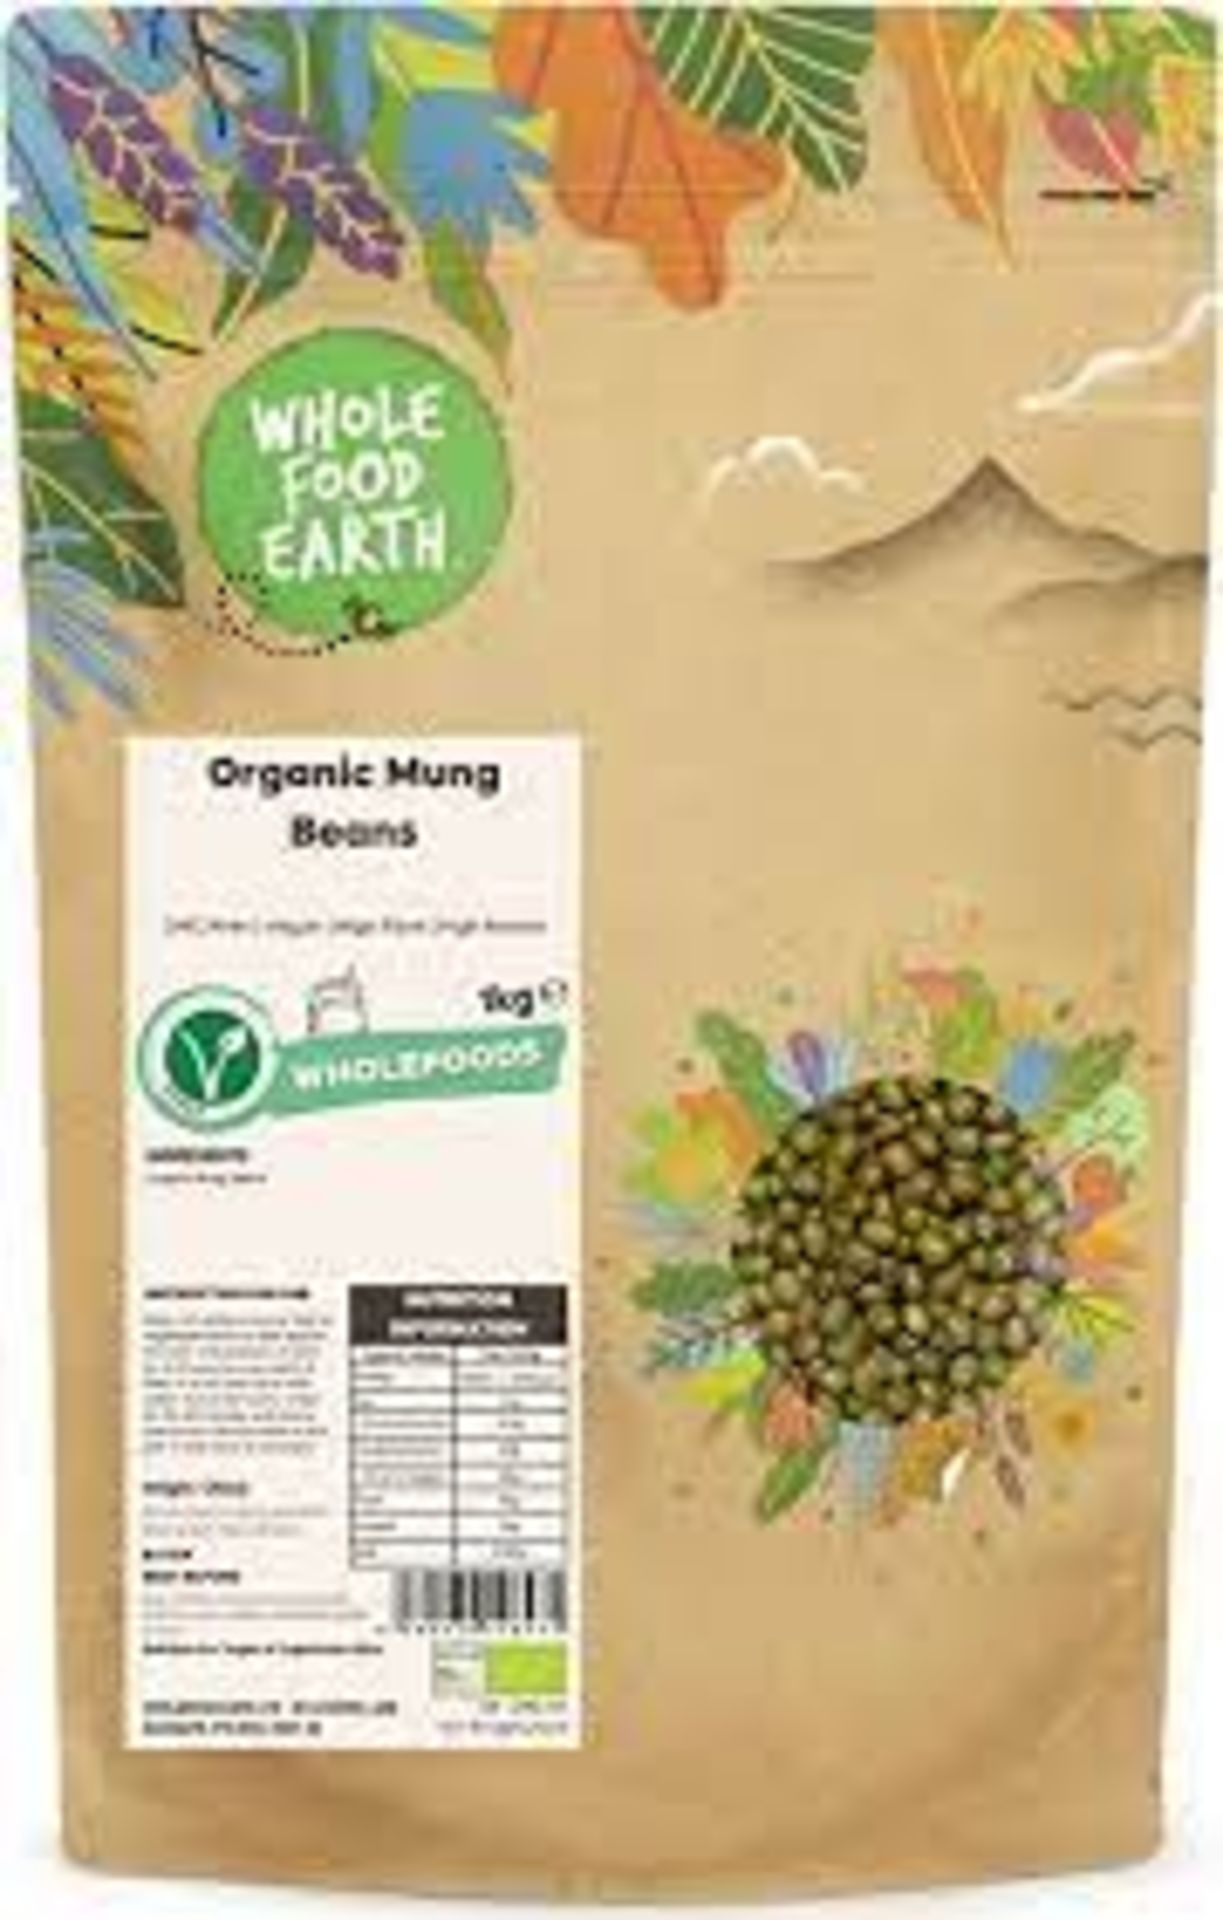 RRP £822 (Approx. Count 82)(A14)pId012f0Vi 8 x Wholefood Earth Organic Mung Beans 1kg 4 x